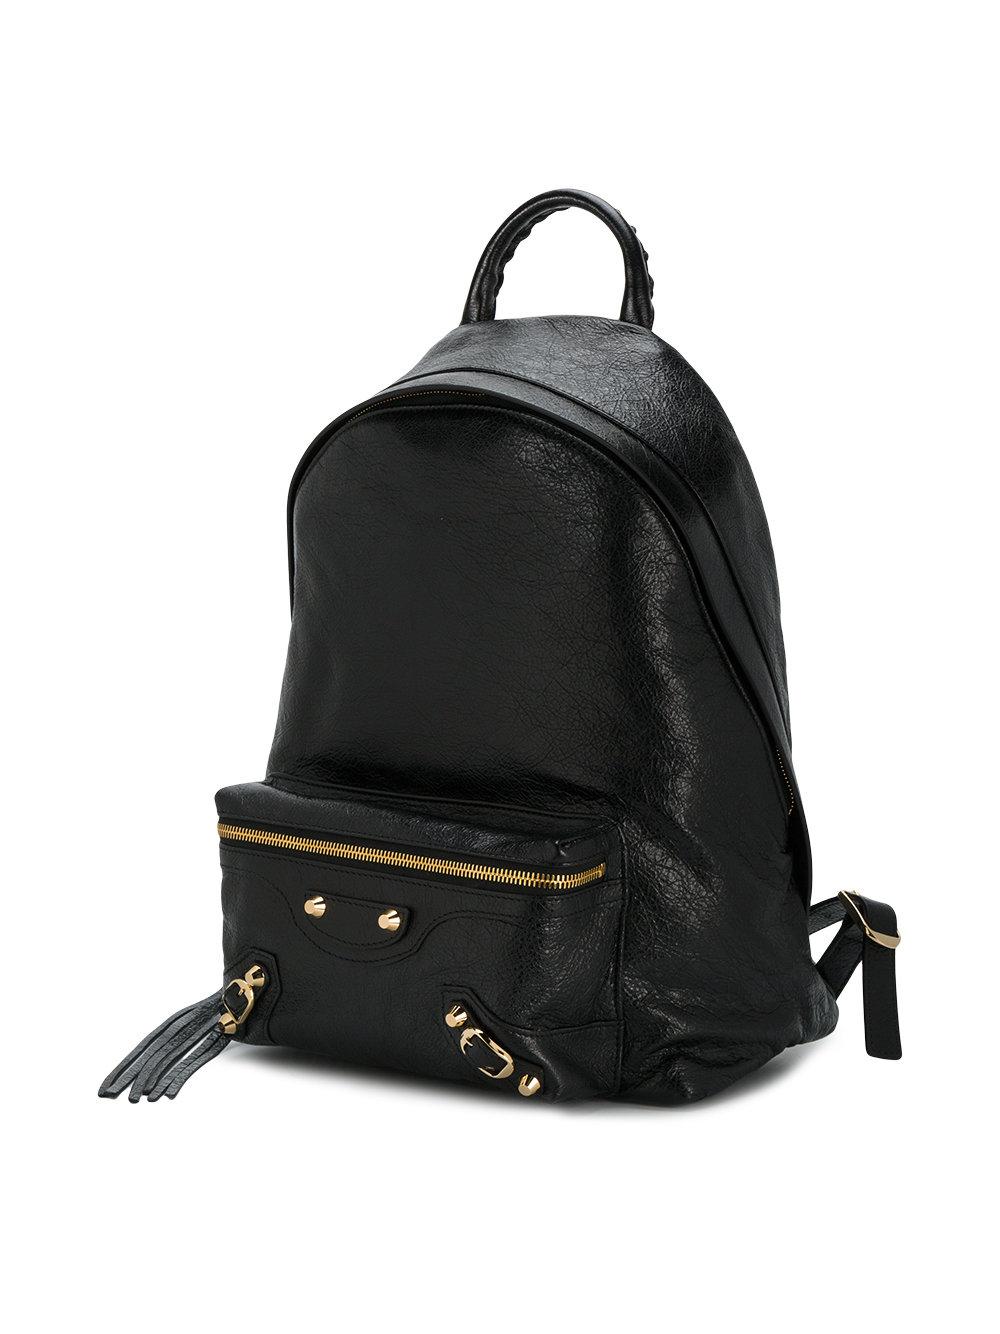 Classic City Backpack in Black 